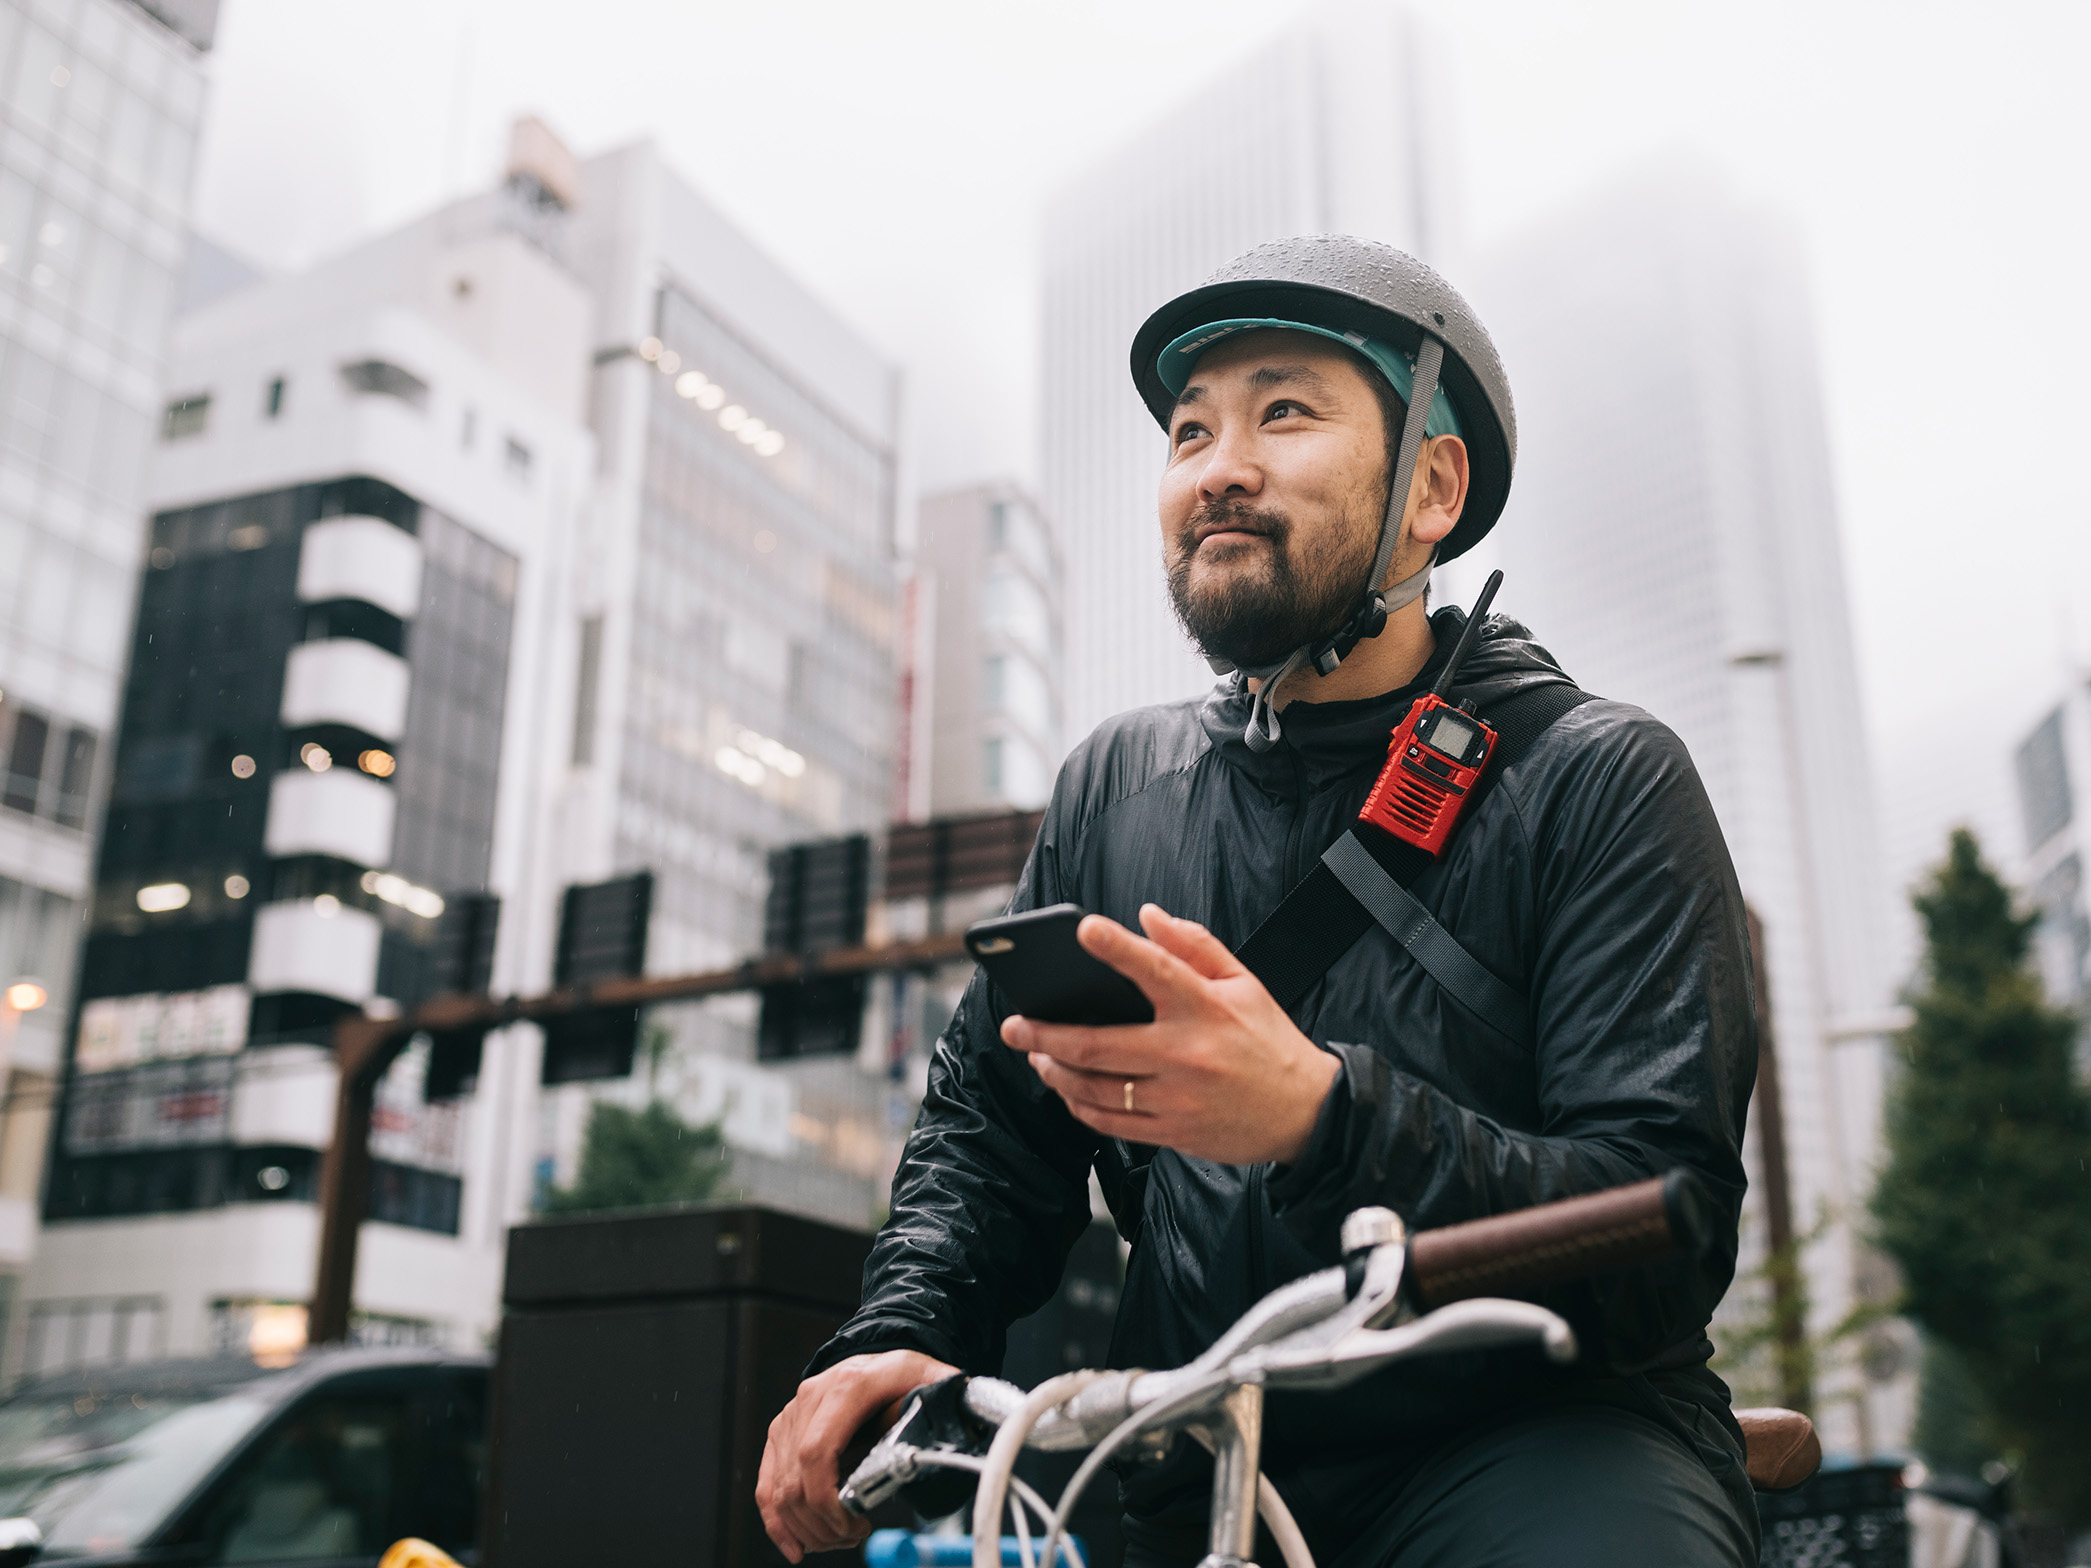 Person sitting on a bicycle holding phone